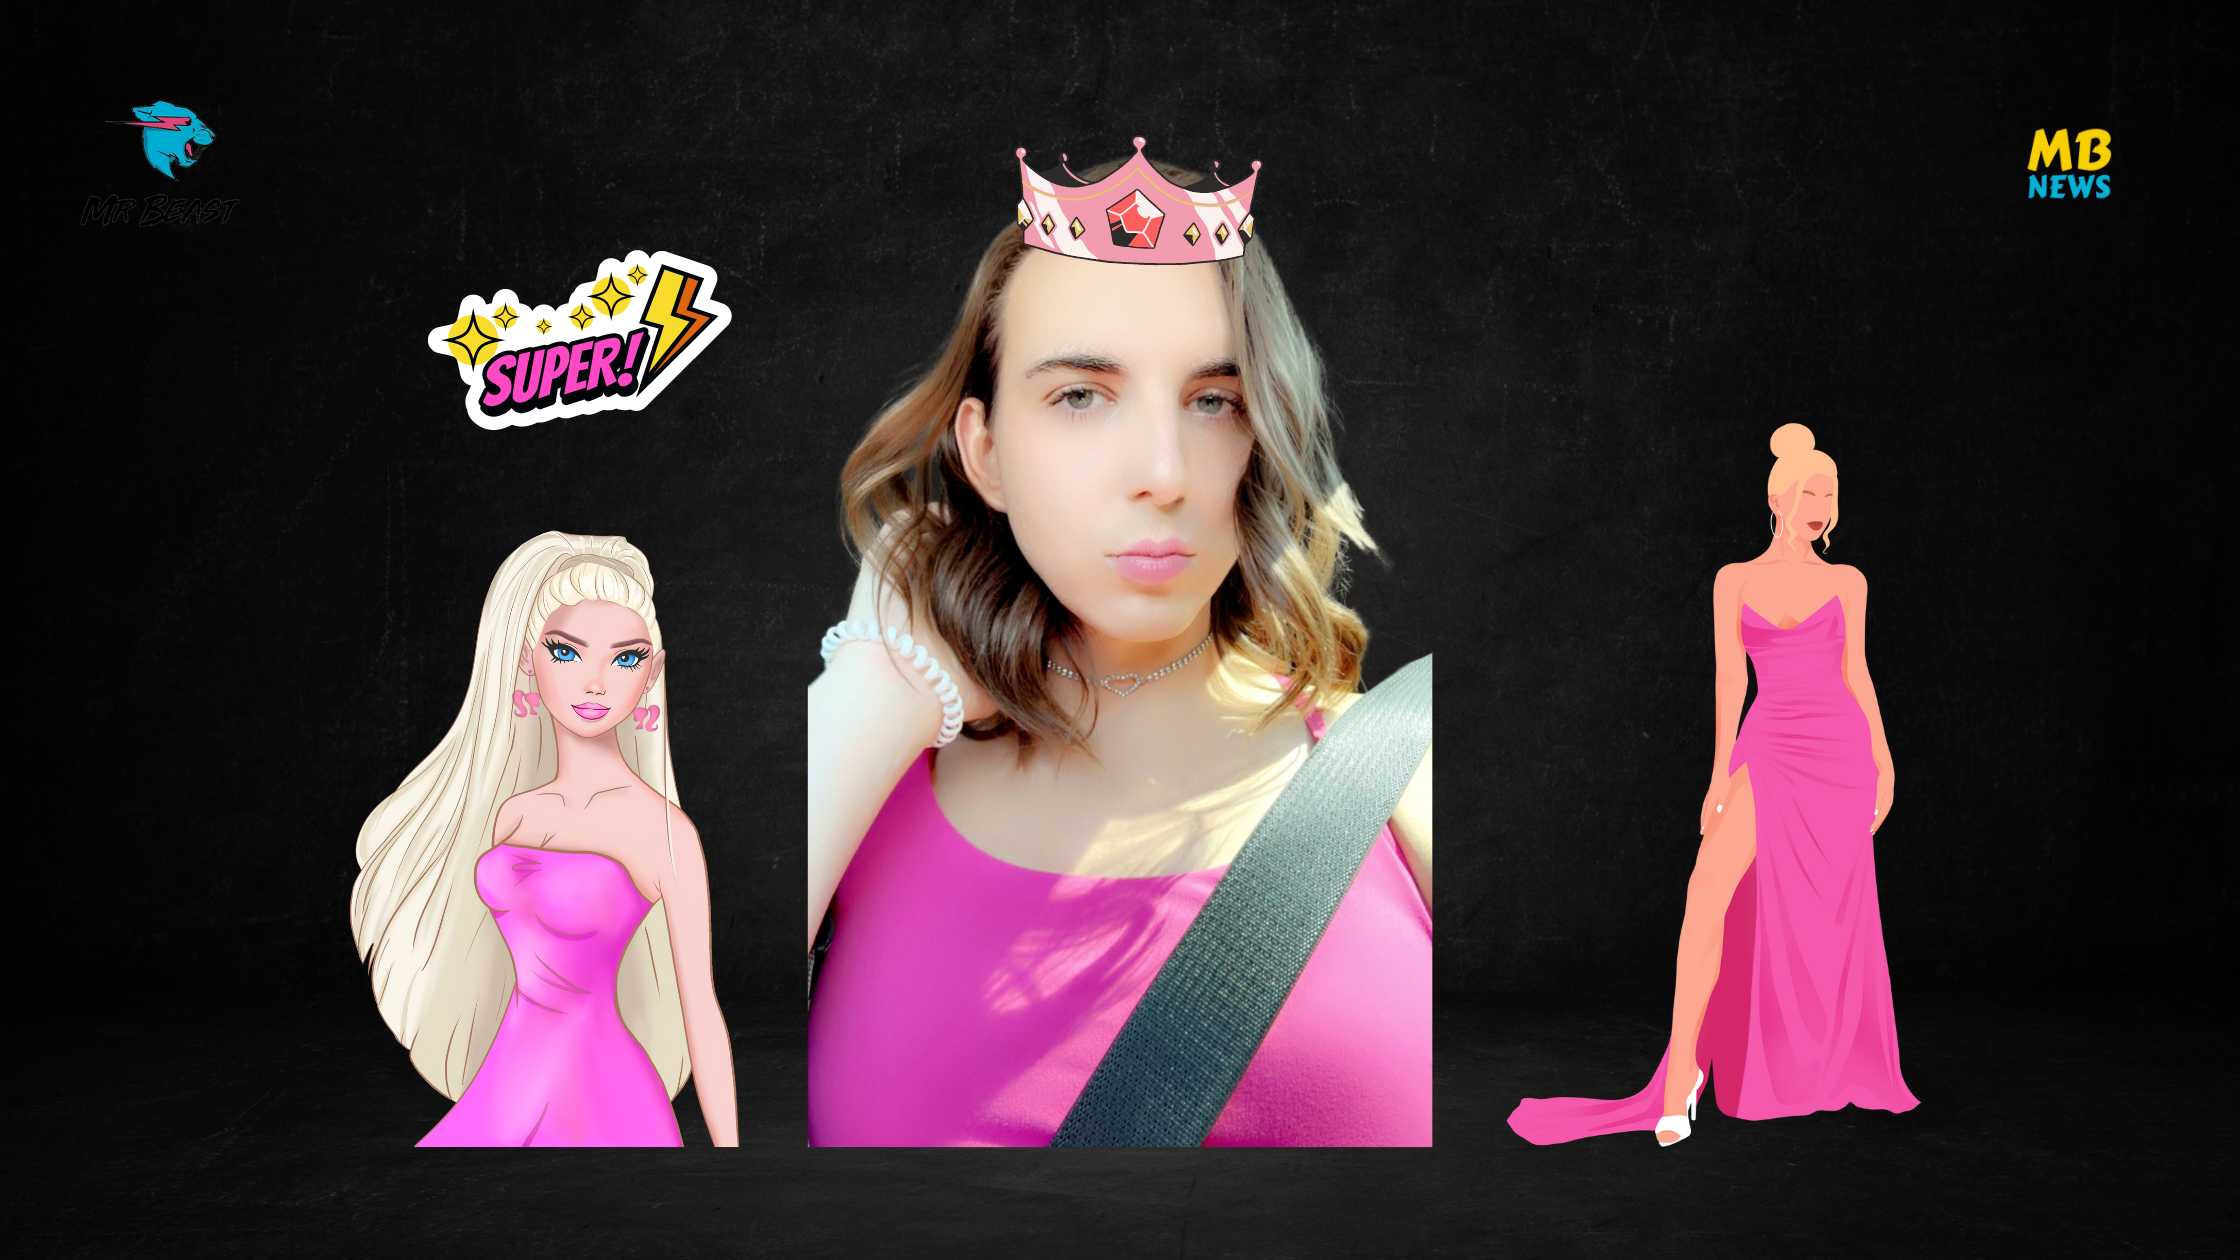 Kris Tyson from MrBeast Enjoys Barbie Movie in Pink Dress Garners both Admiration and Criticism